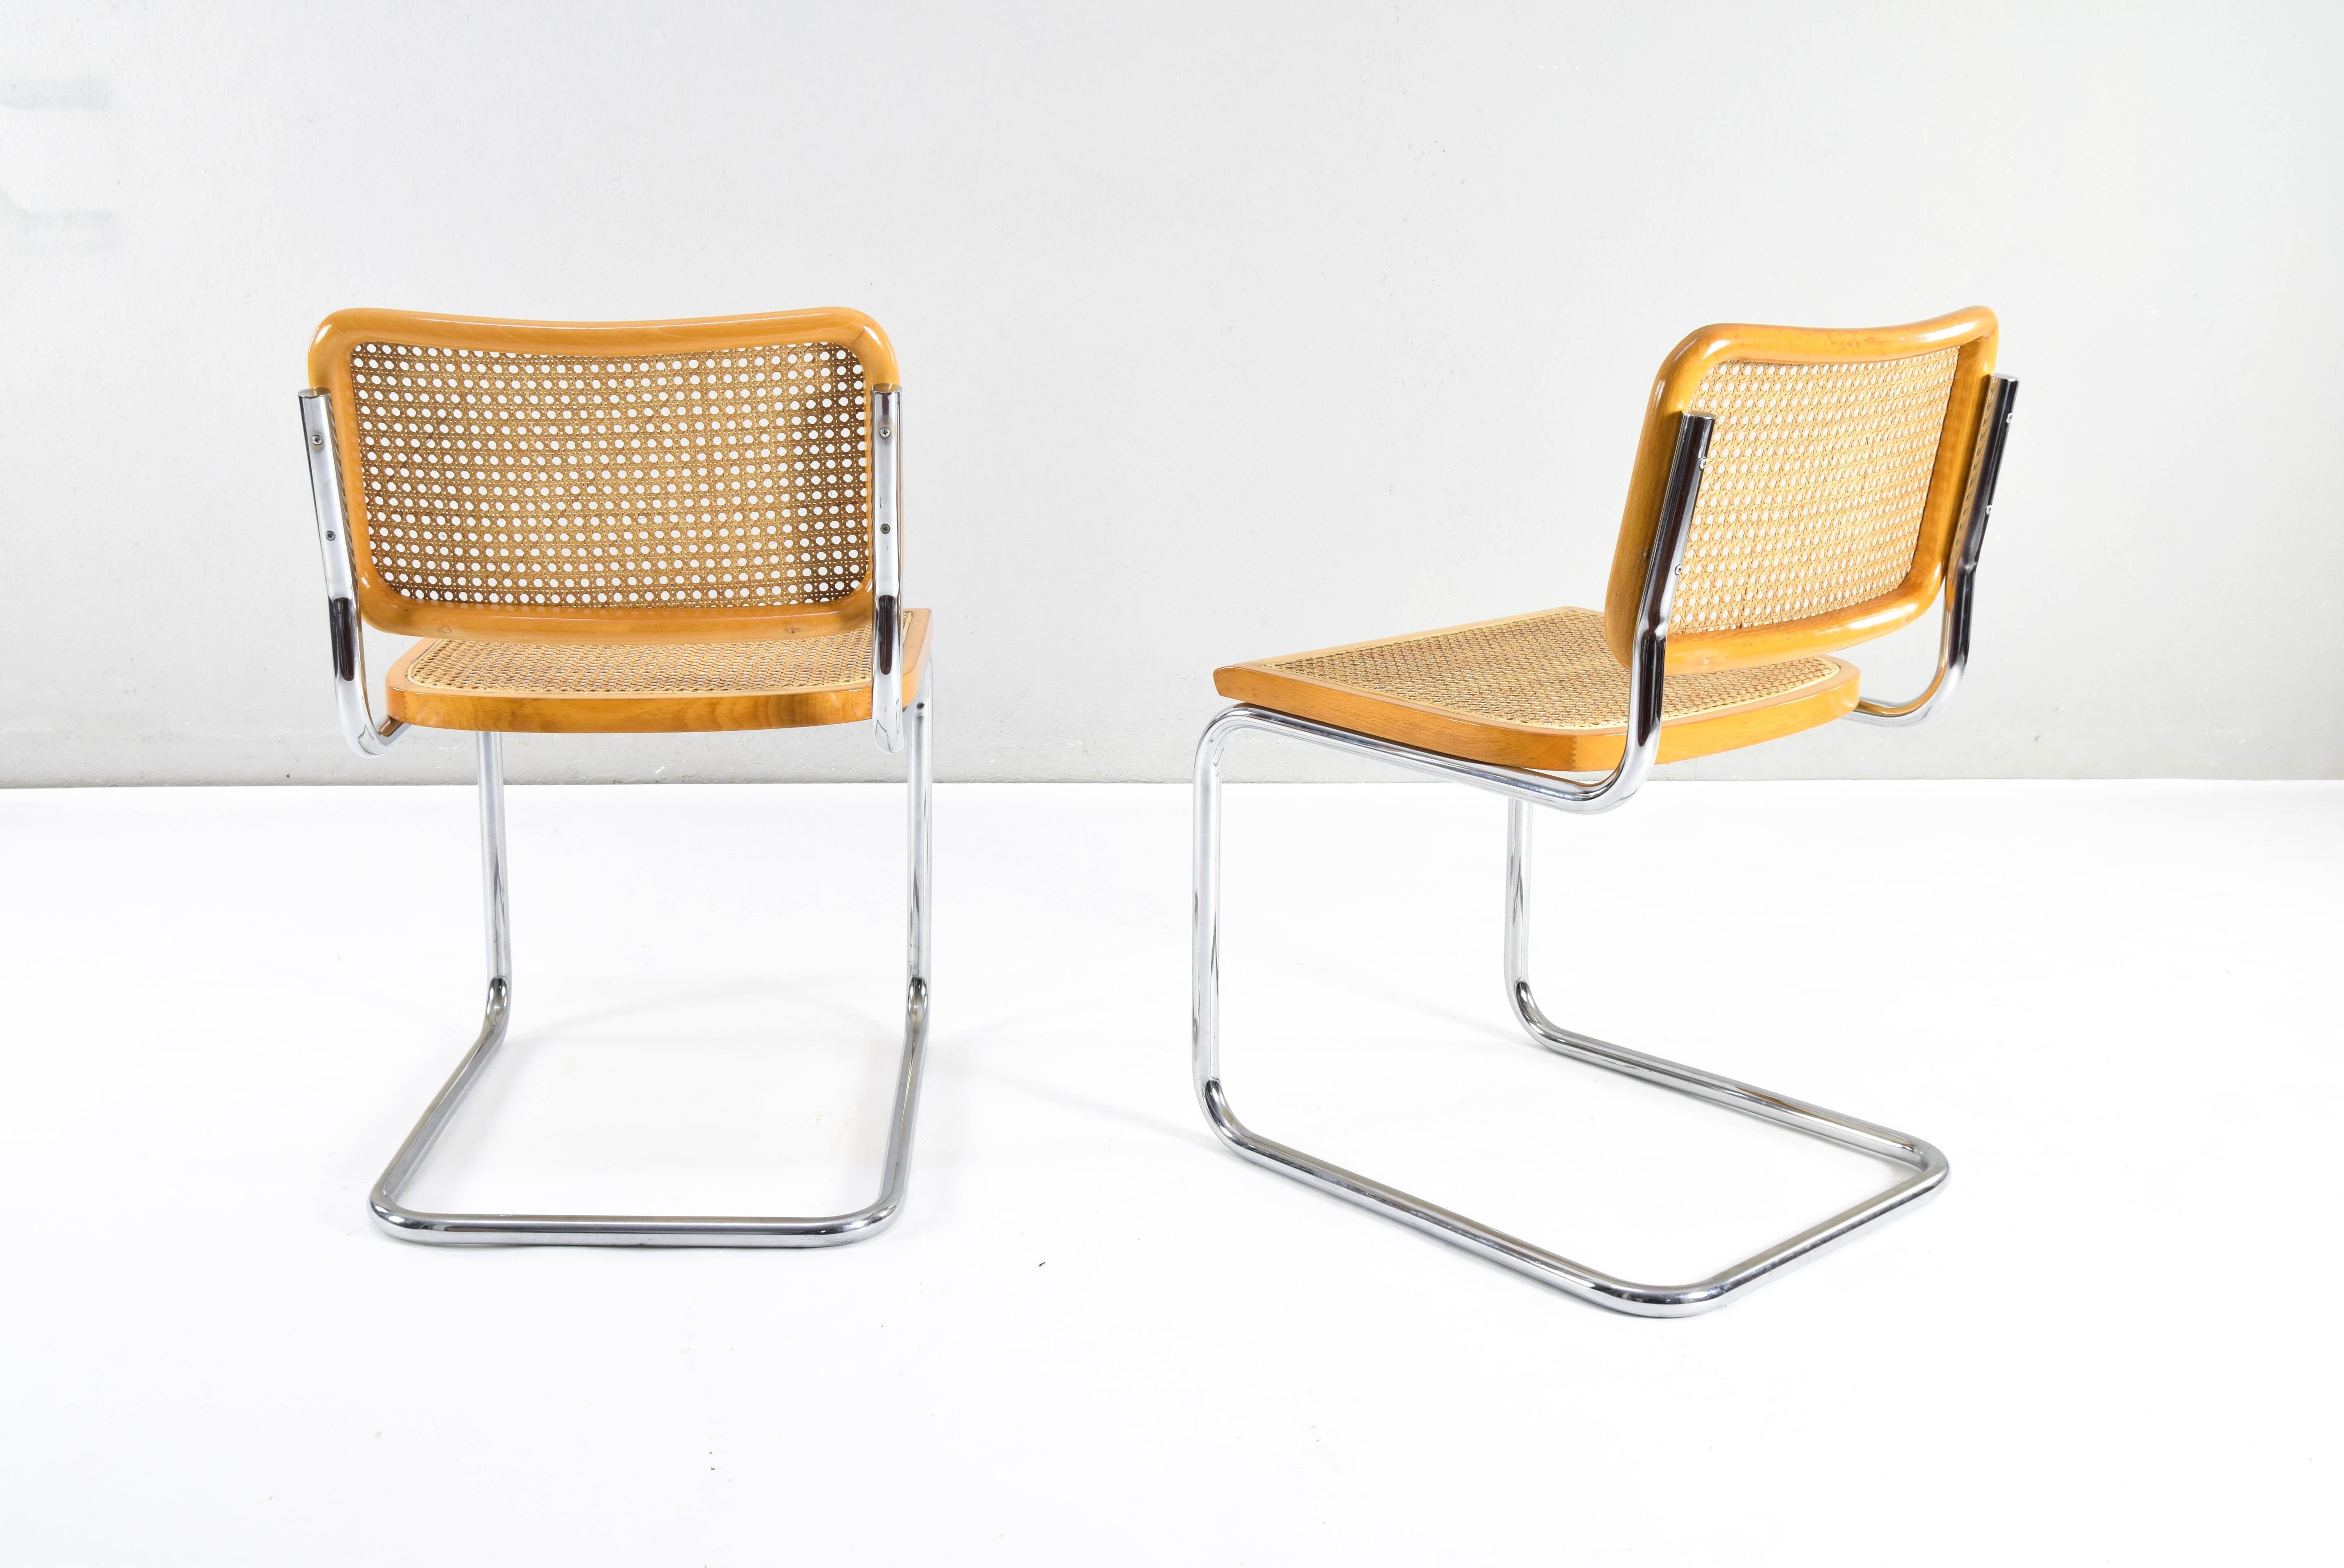 Steel Set of Two Mid-Century Modern Marcel Breuer B32 Blonde Cesca Chairs, Italy 1970s For Sale